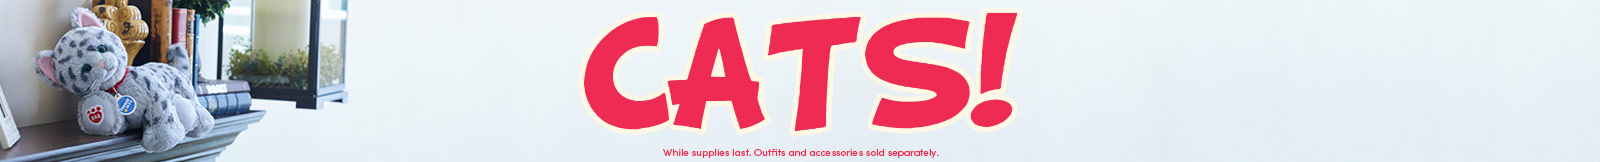 Cats Category Banner